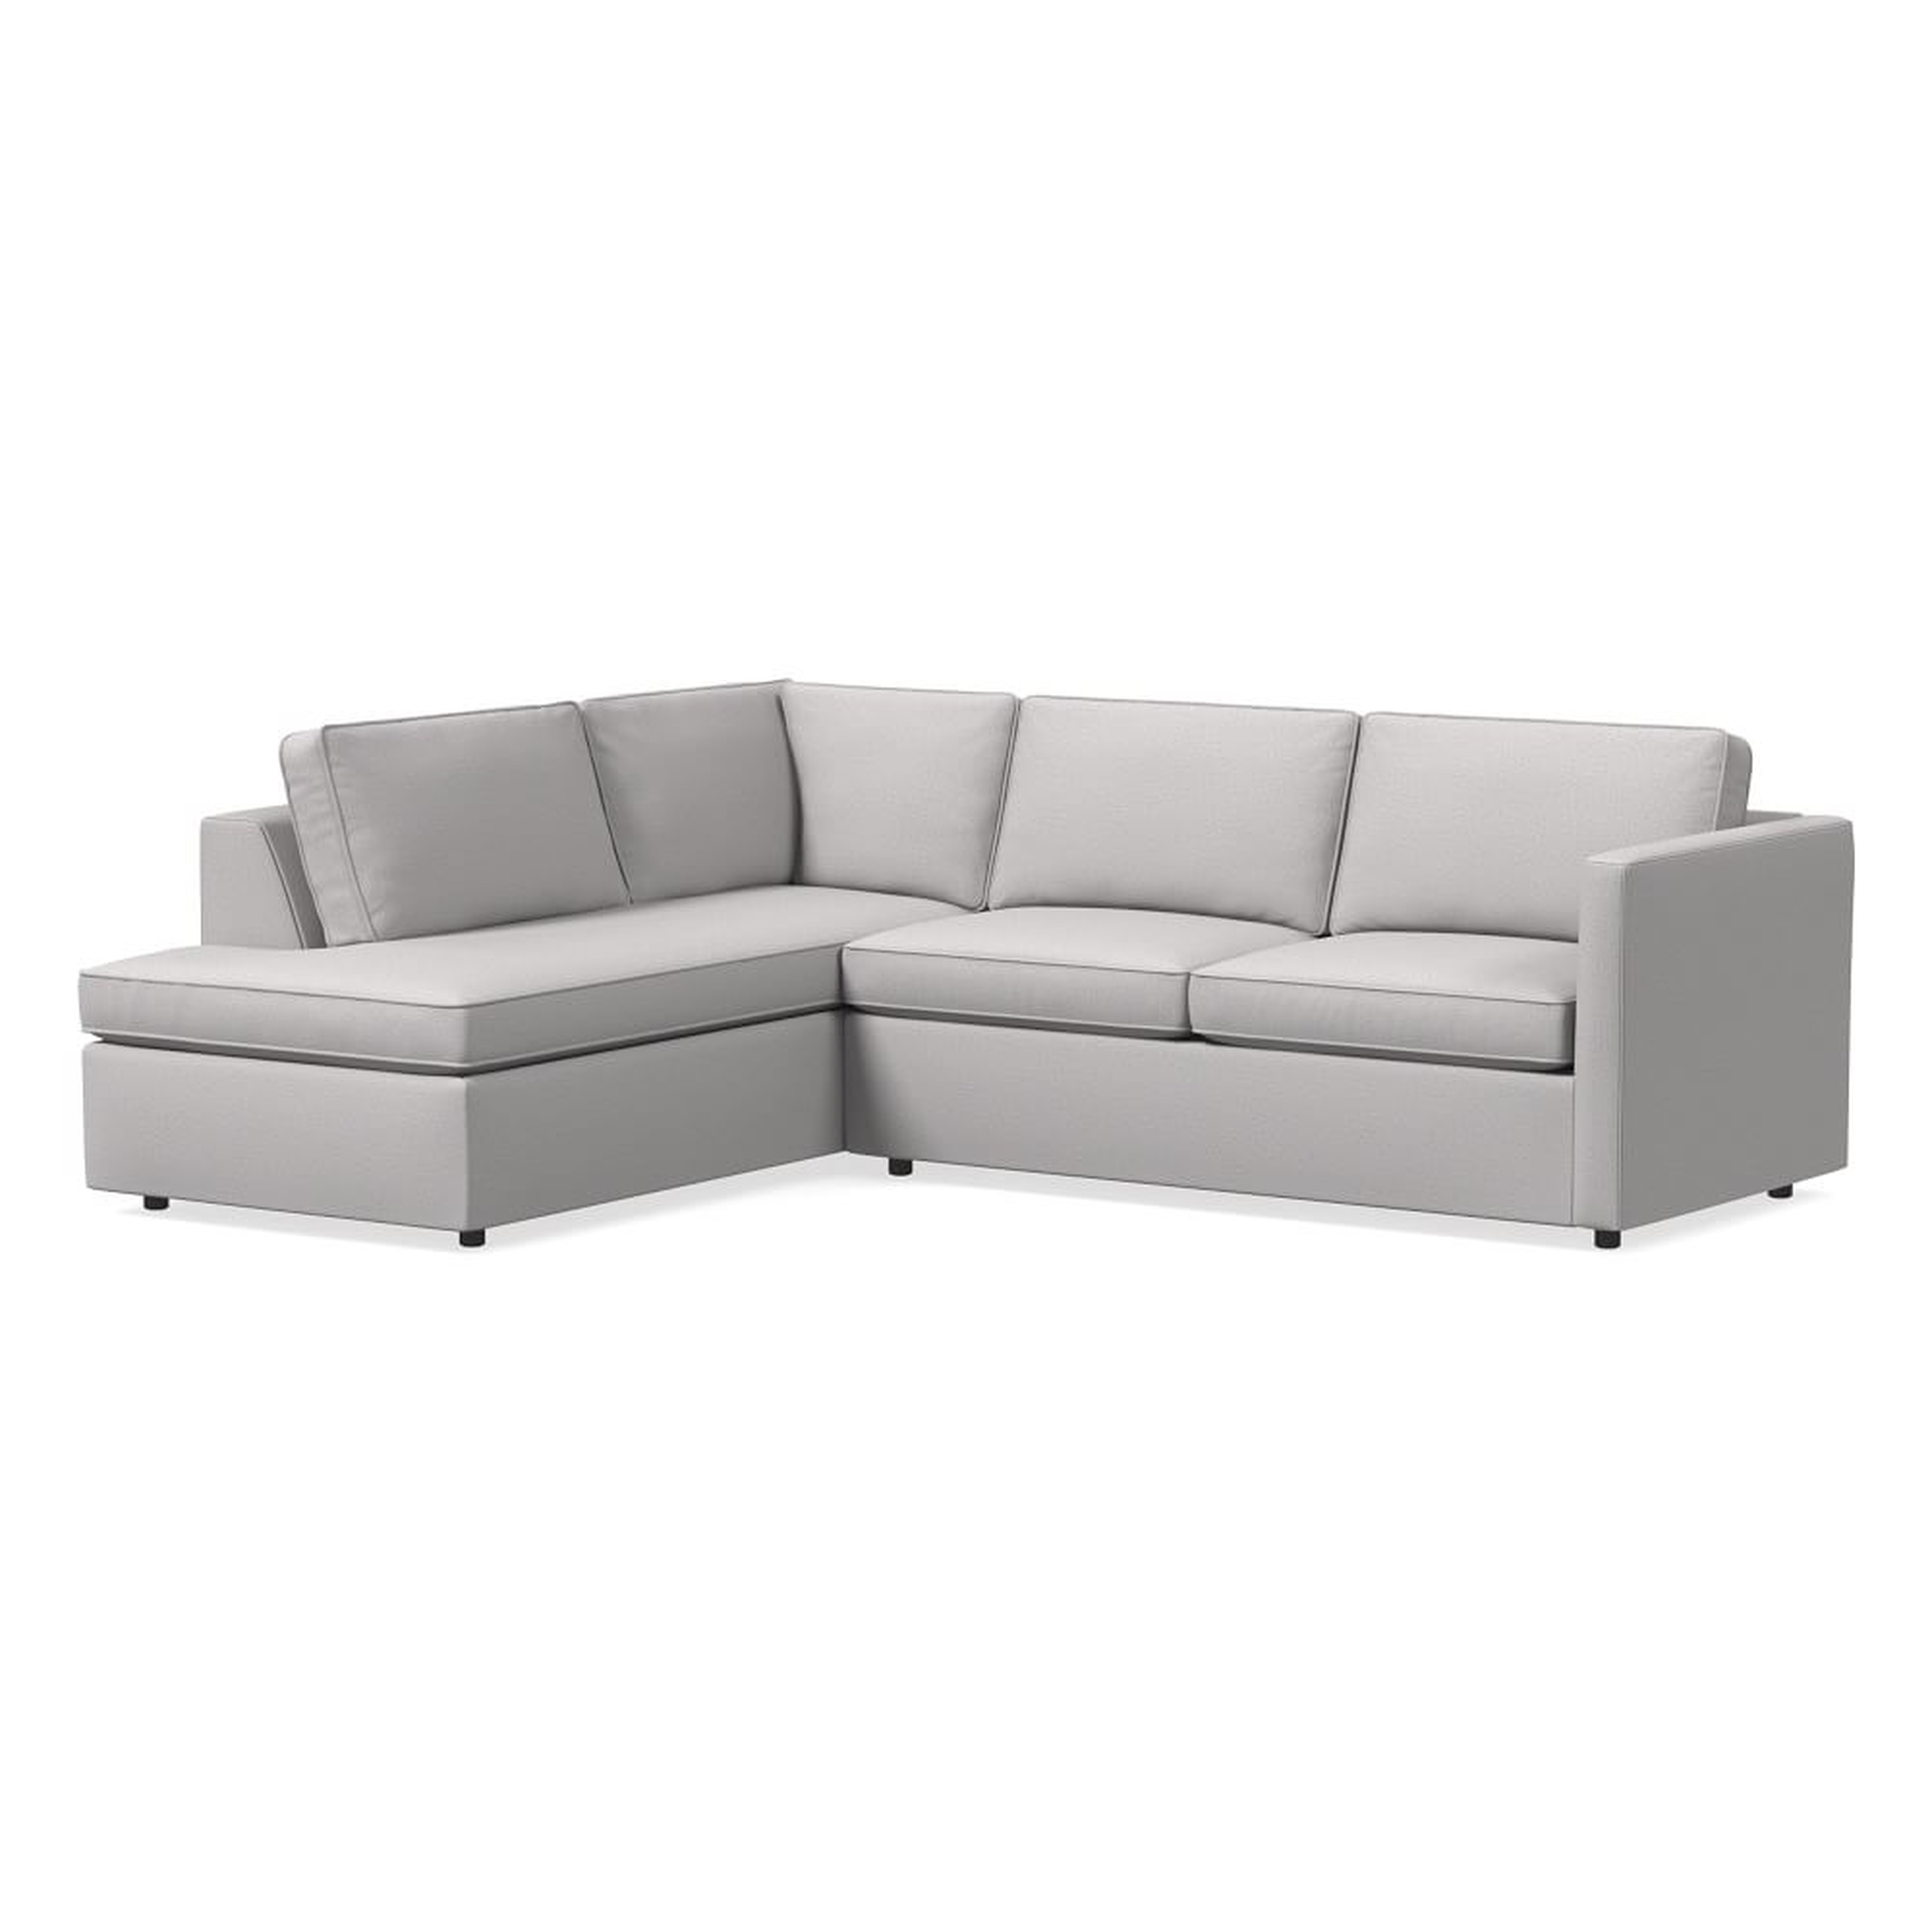 Harris 100" Left Multi Seat 2-Piece Bumper Chaise Sectional, Petite Depth, Chenille Tweed, Frost Gray - West Elm